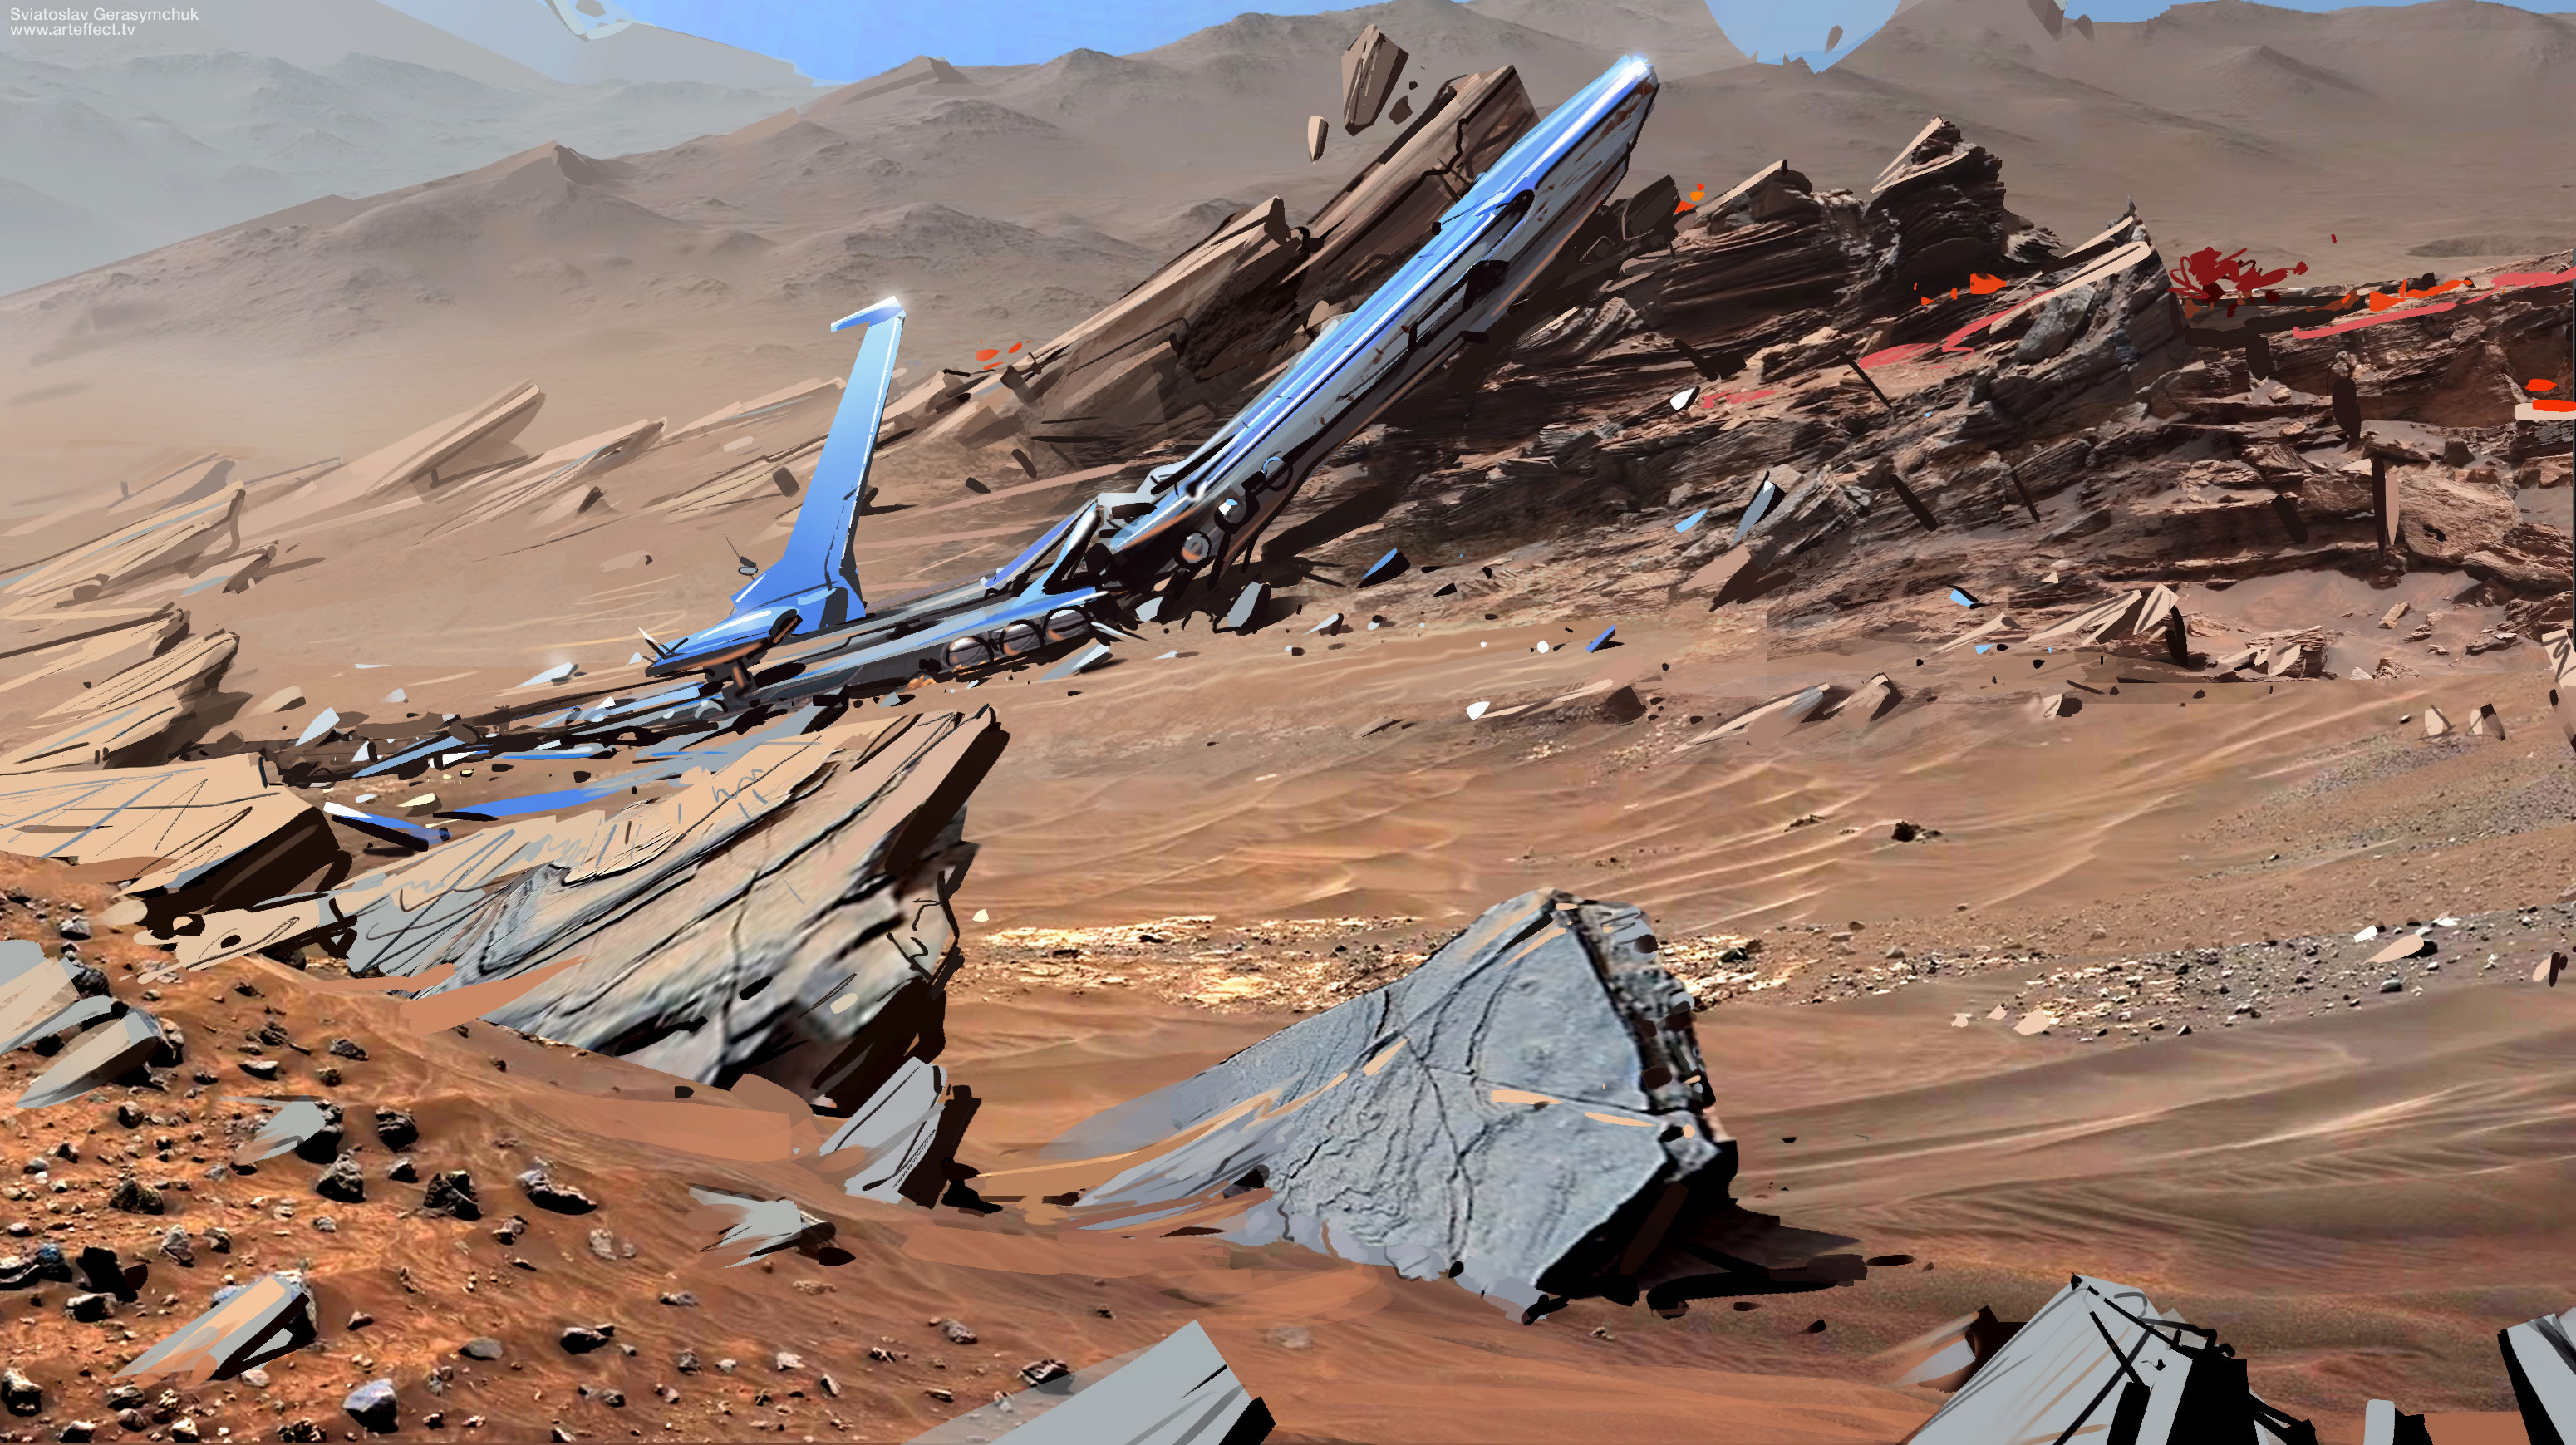 Landscape with a crashed spaceship